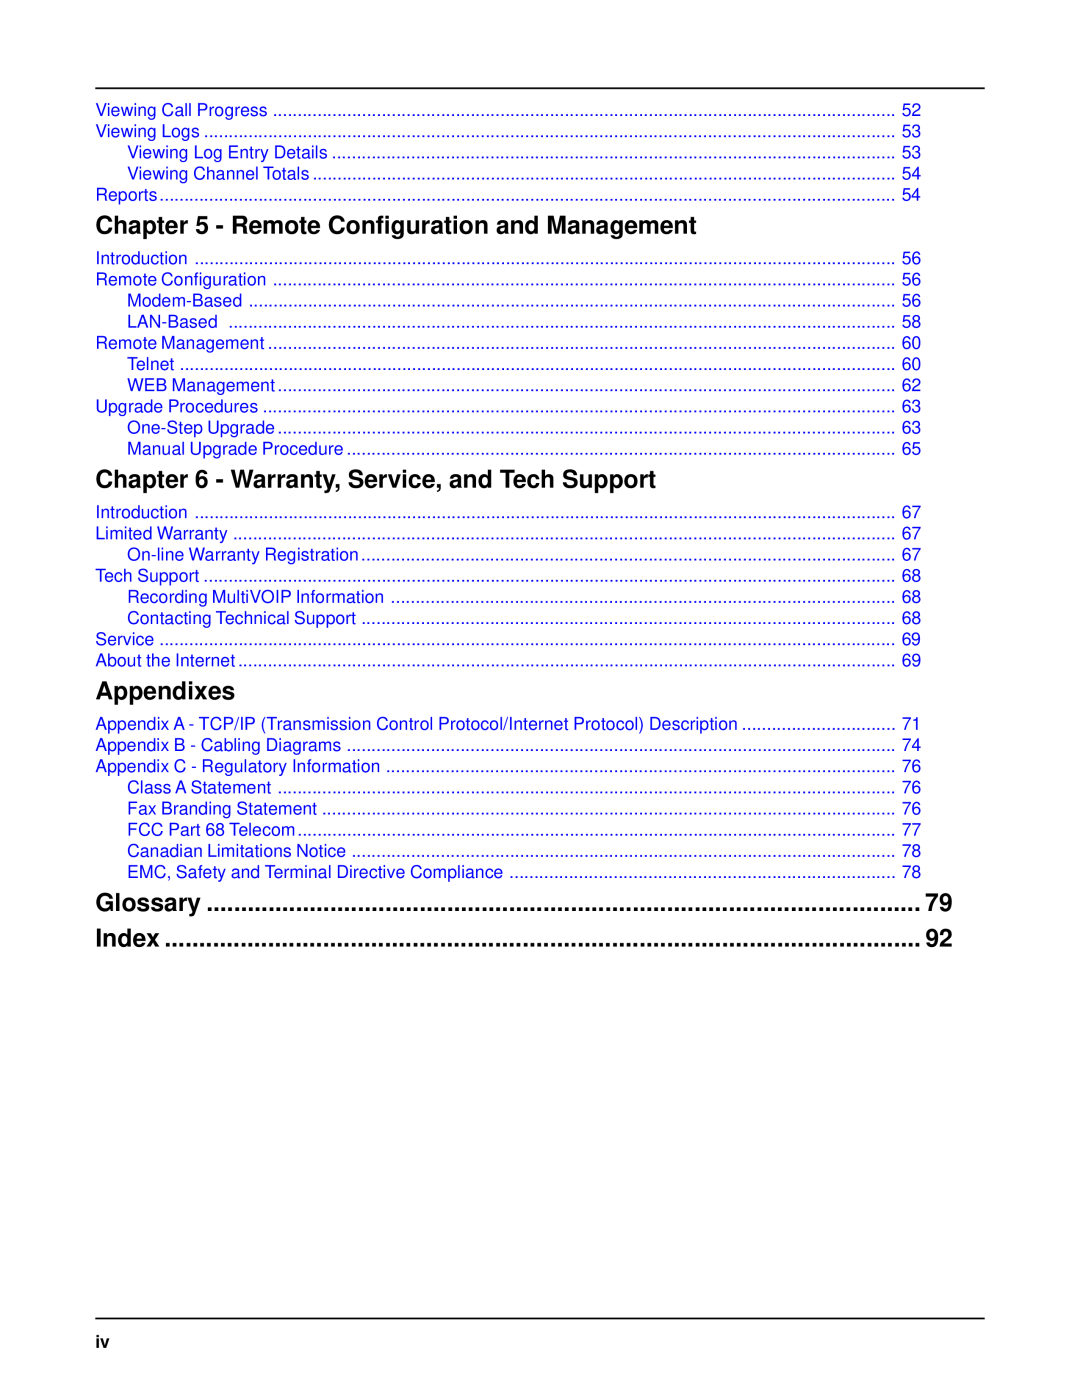 Multi-Tech Systems MVP 800 Remote Configuration and Management, Warranty, Service, and Tech Support, Appendixes, Glossary 